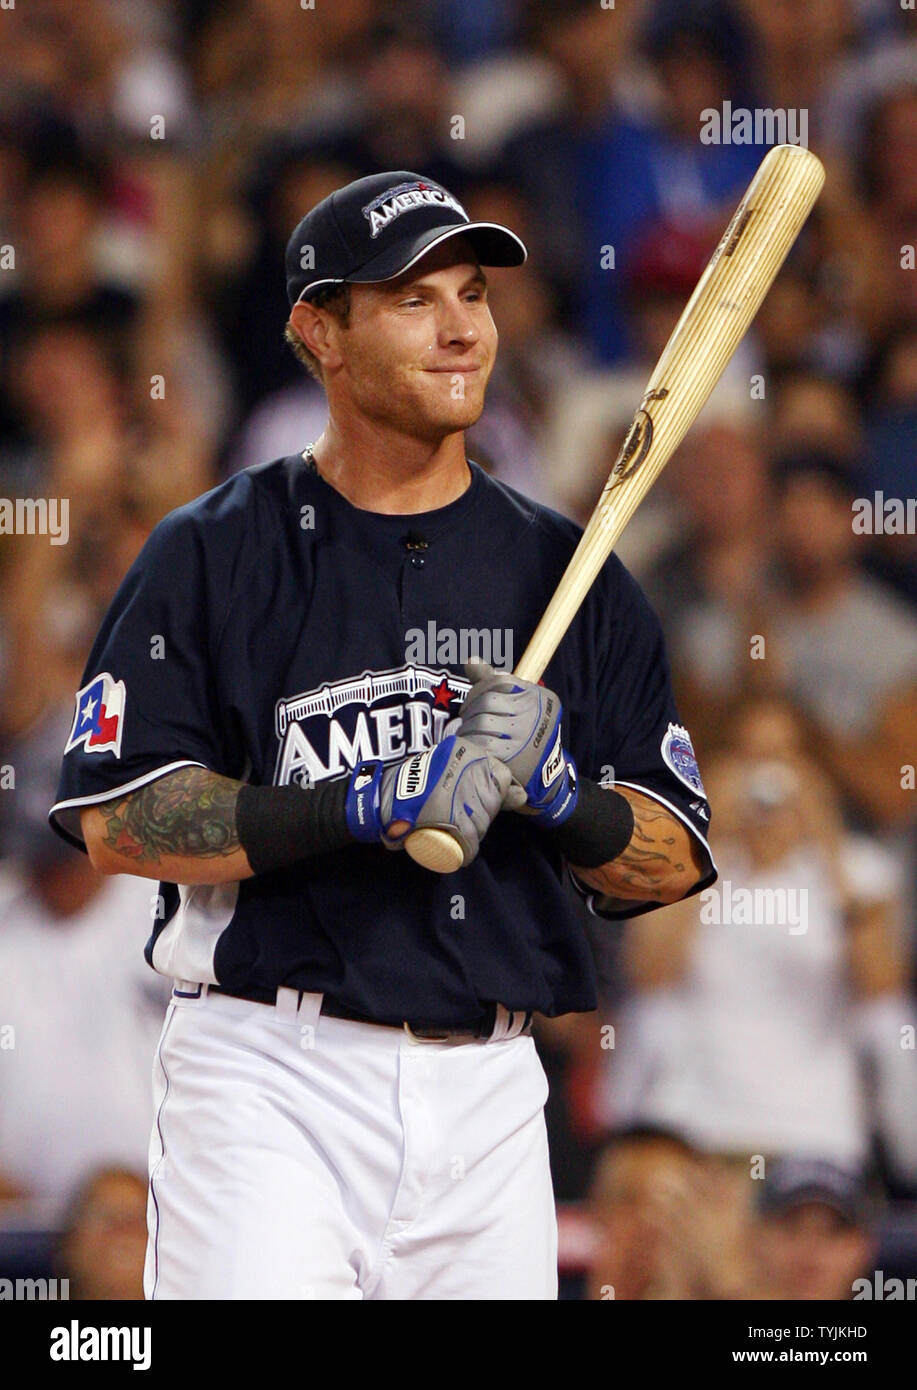 Texas Rangers Josh Hamilton smiles while standing at the plate in the first round of the State Farm Home Run Derby at Yankee Stadium in New York City on July 14, 2008.        (UPI Photo/John Angelillo) Stock Photo